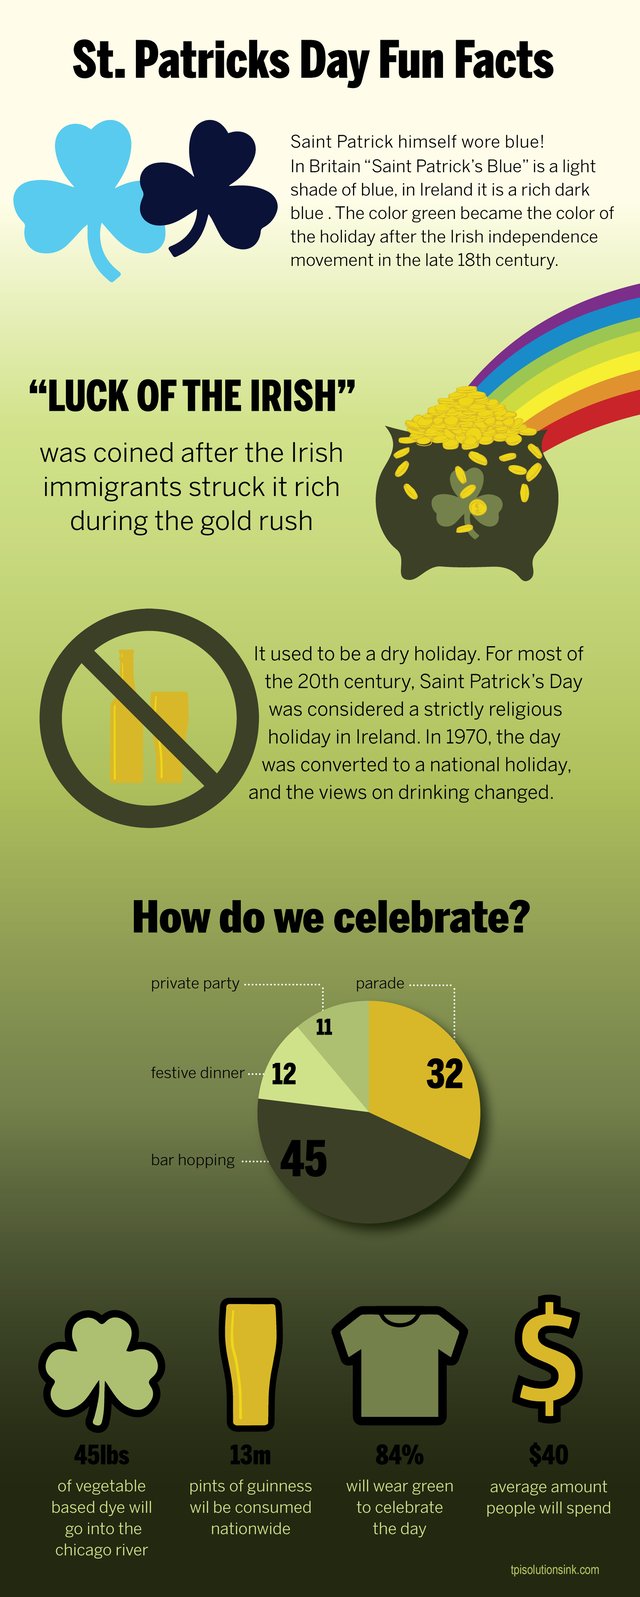 St. Patrick's Day Fun Facts Infographic from TPI Solutions Ink.